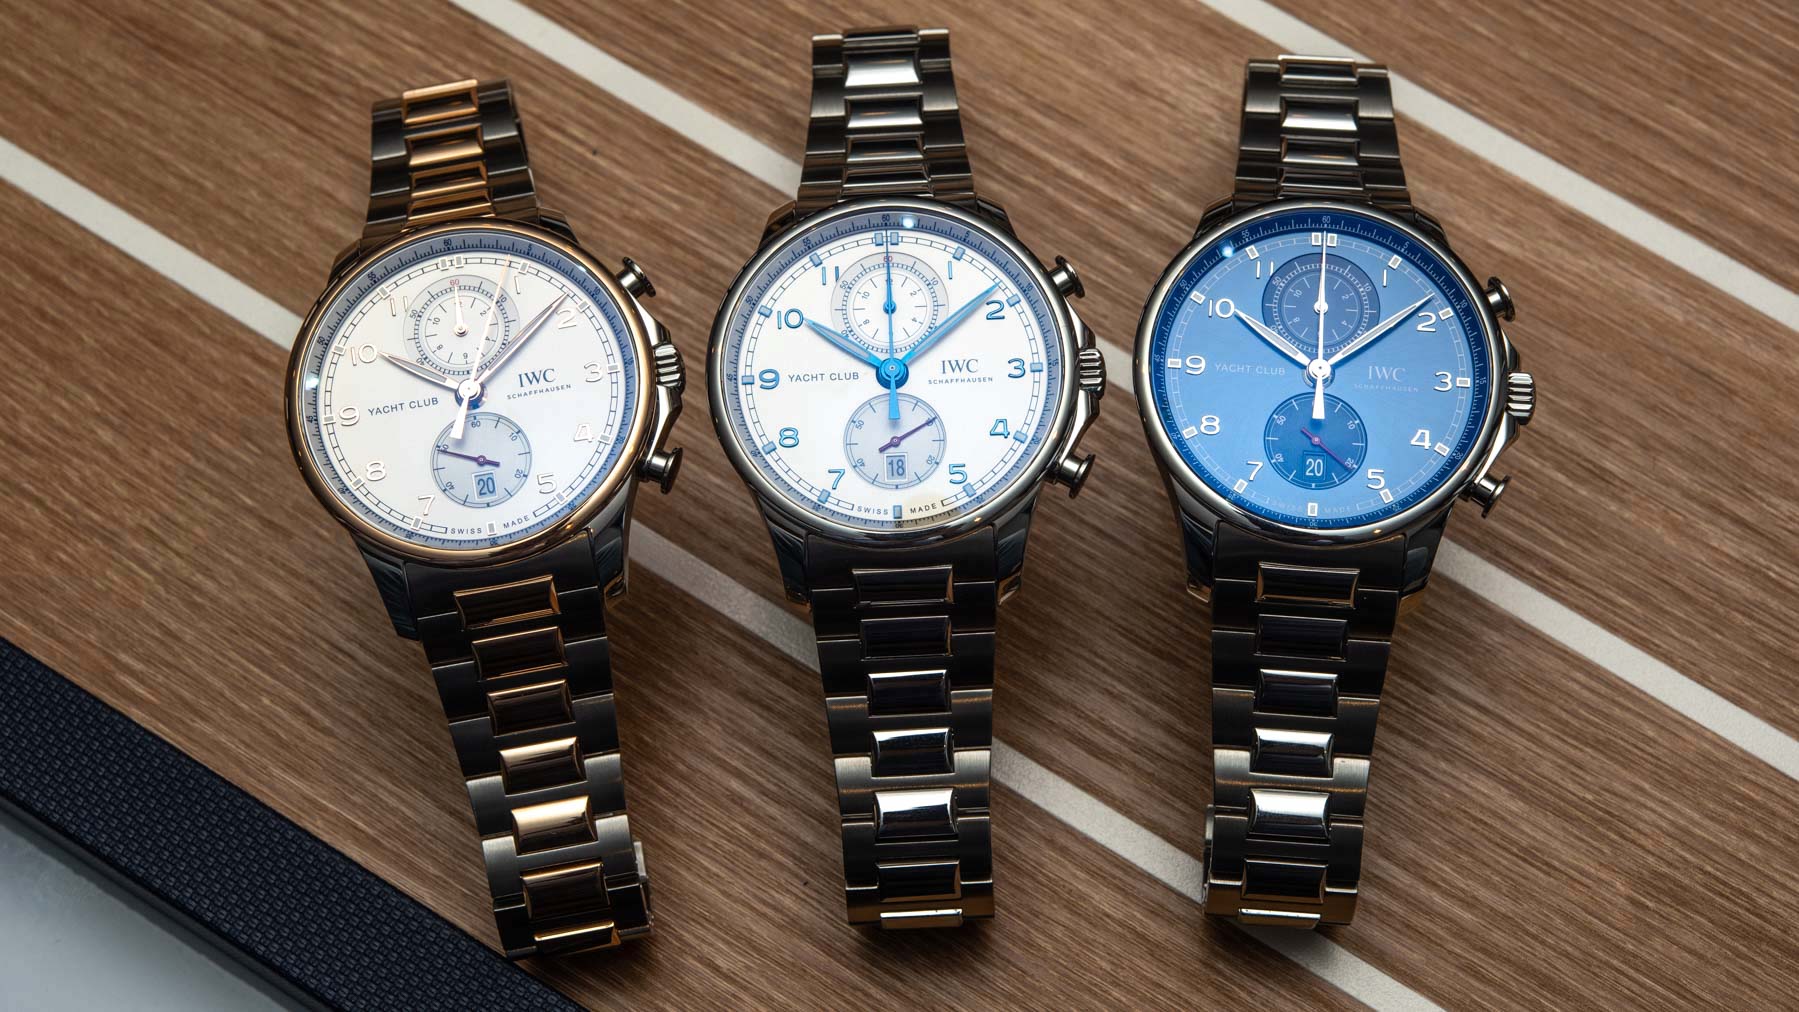 Hands-On Debut: IWC Portugieser Yacht Club Chronograph Collection Redesigned For 2020